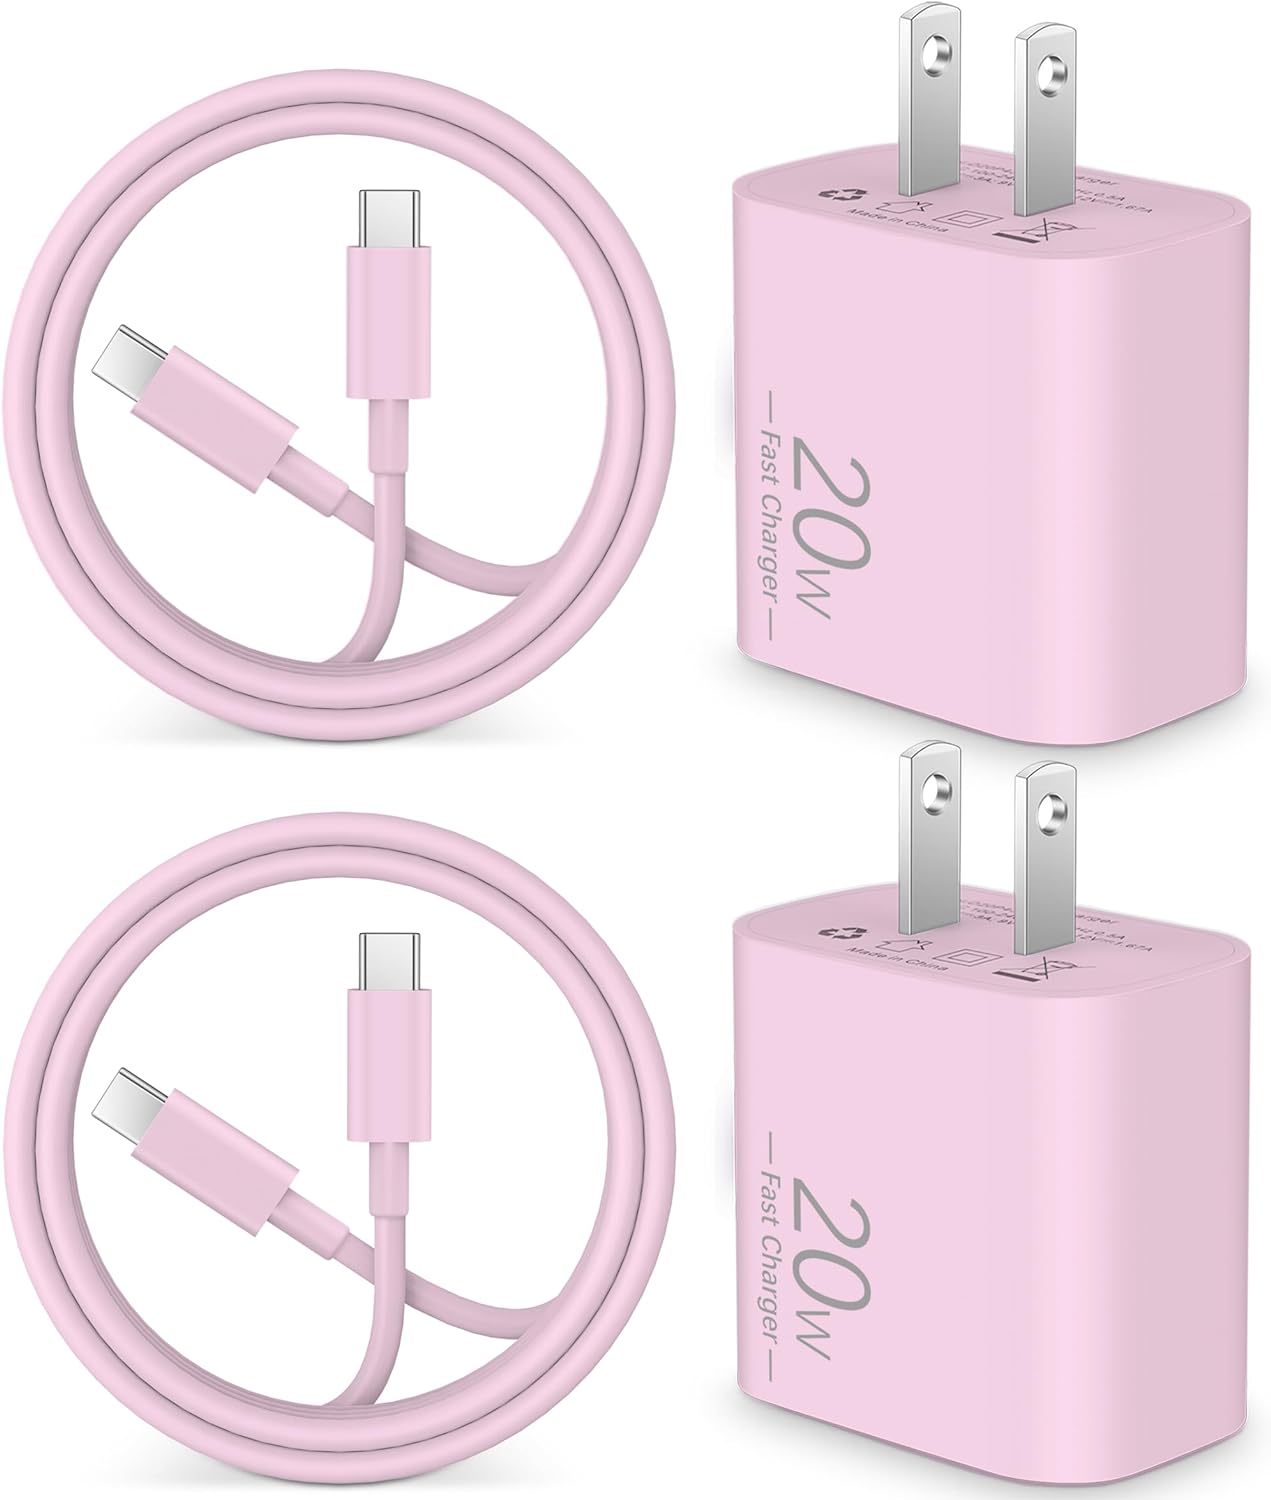 20W USB C Fast Charger for iPhone 15/15 Plus/Pro Max, Google Pixel 8/7/6/5/4XL, iPad Pro 12.9/11 inch, iPad Air 5th/4th, iPad Mini 6/10th, 2Pack USB C Wall Charger Block + 3FT USB C Cable, Pink